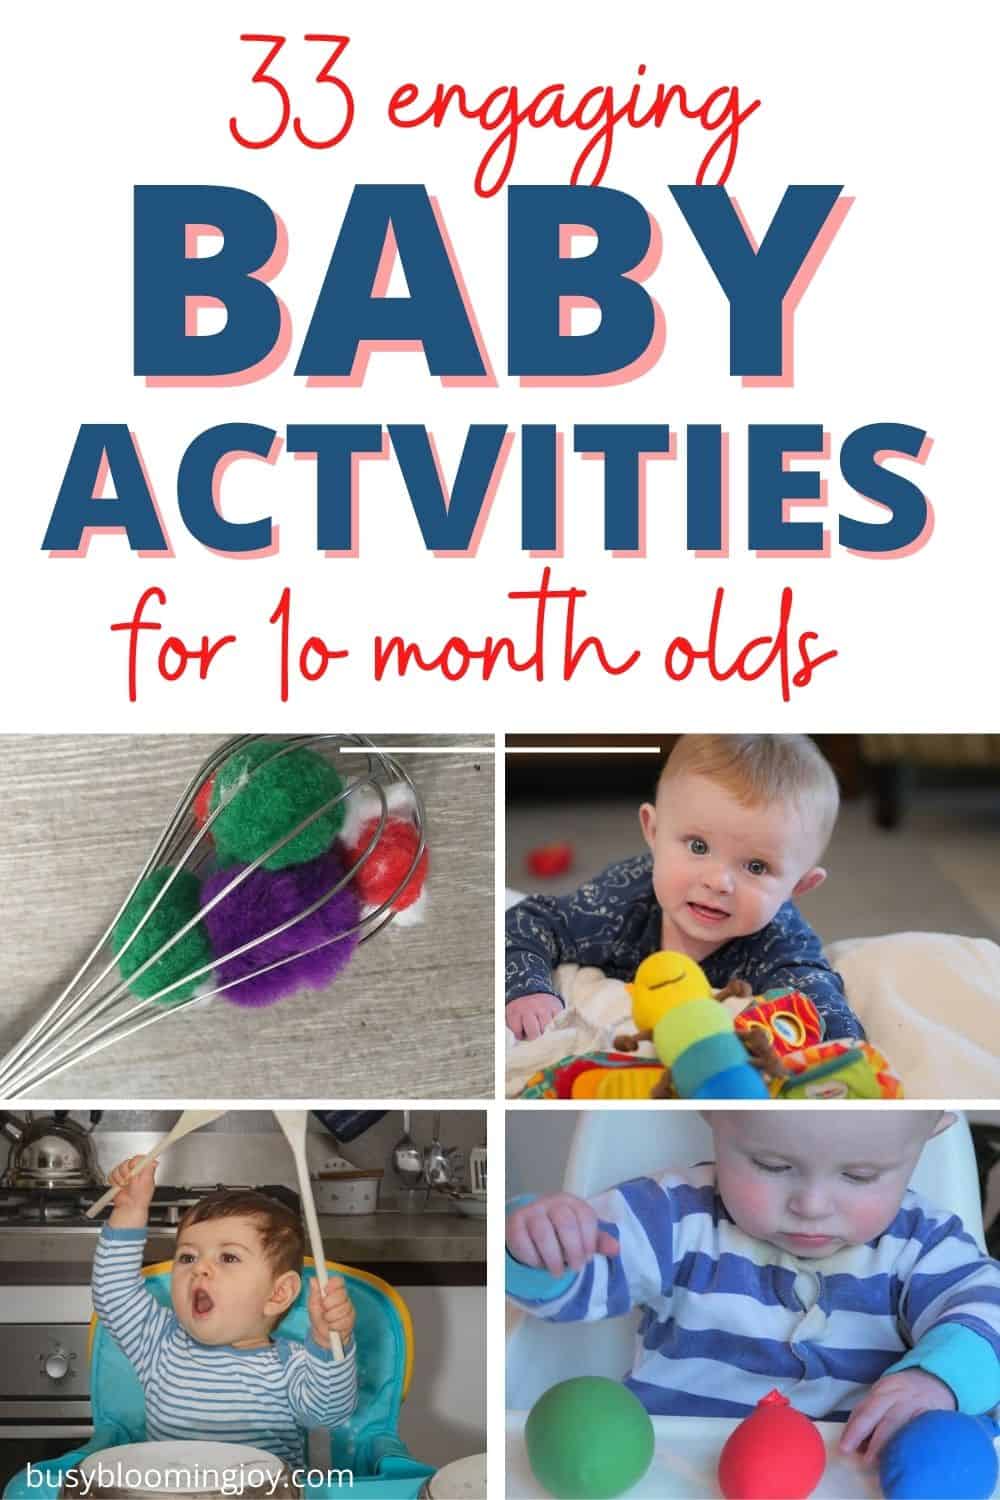 33 Easy & engaging activities for 10 month olds